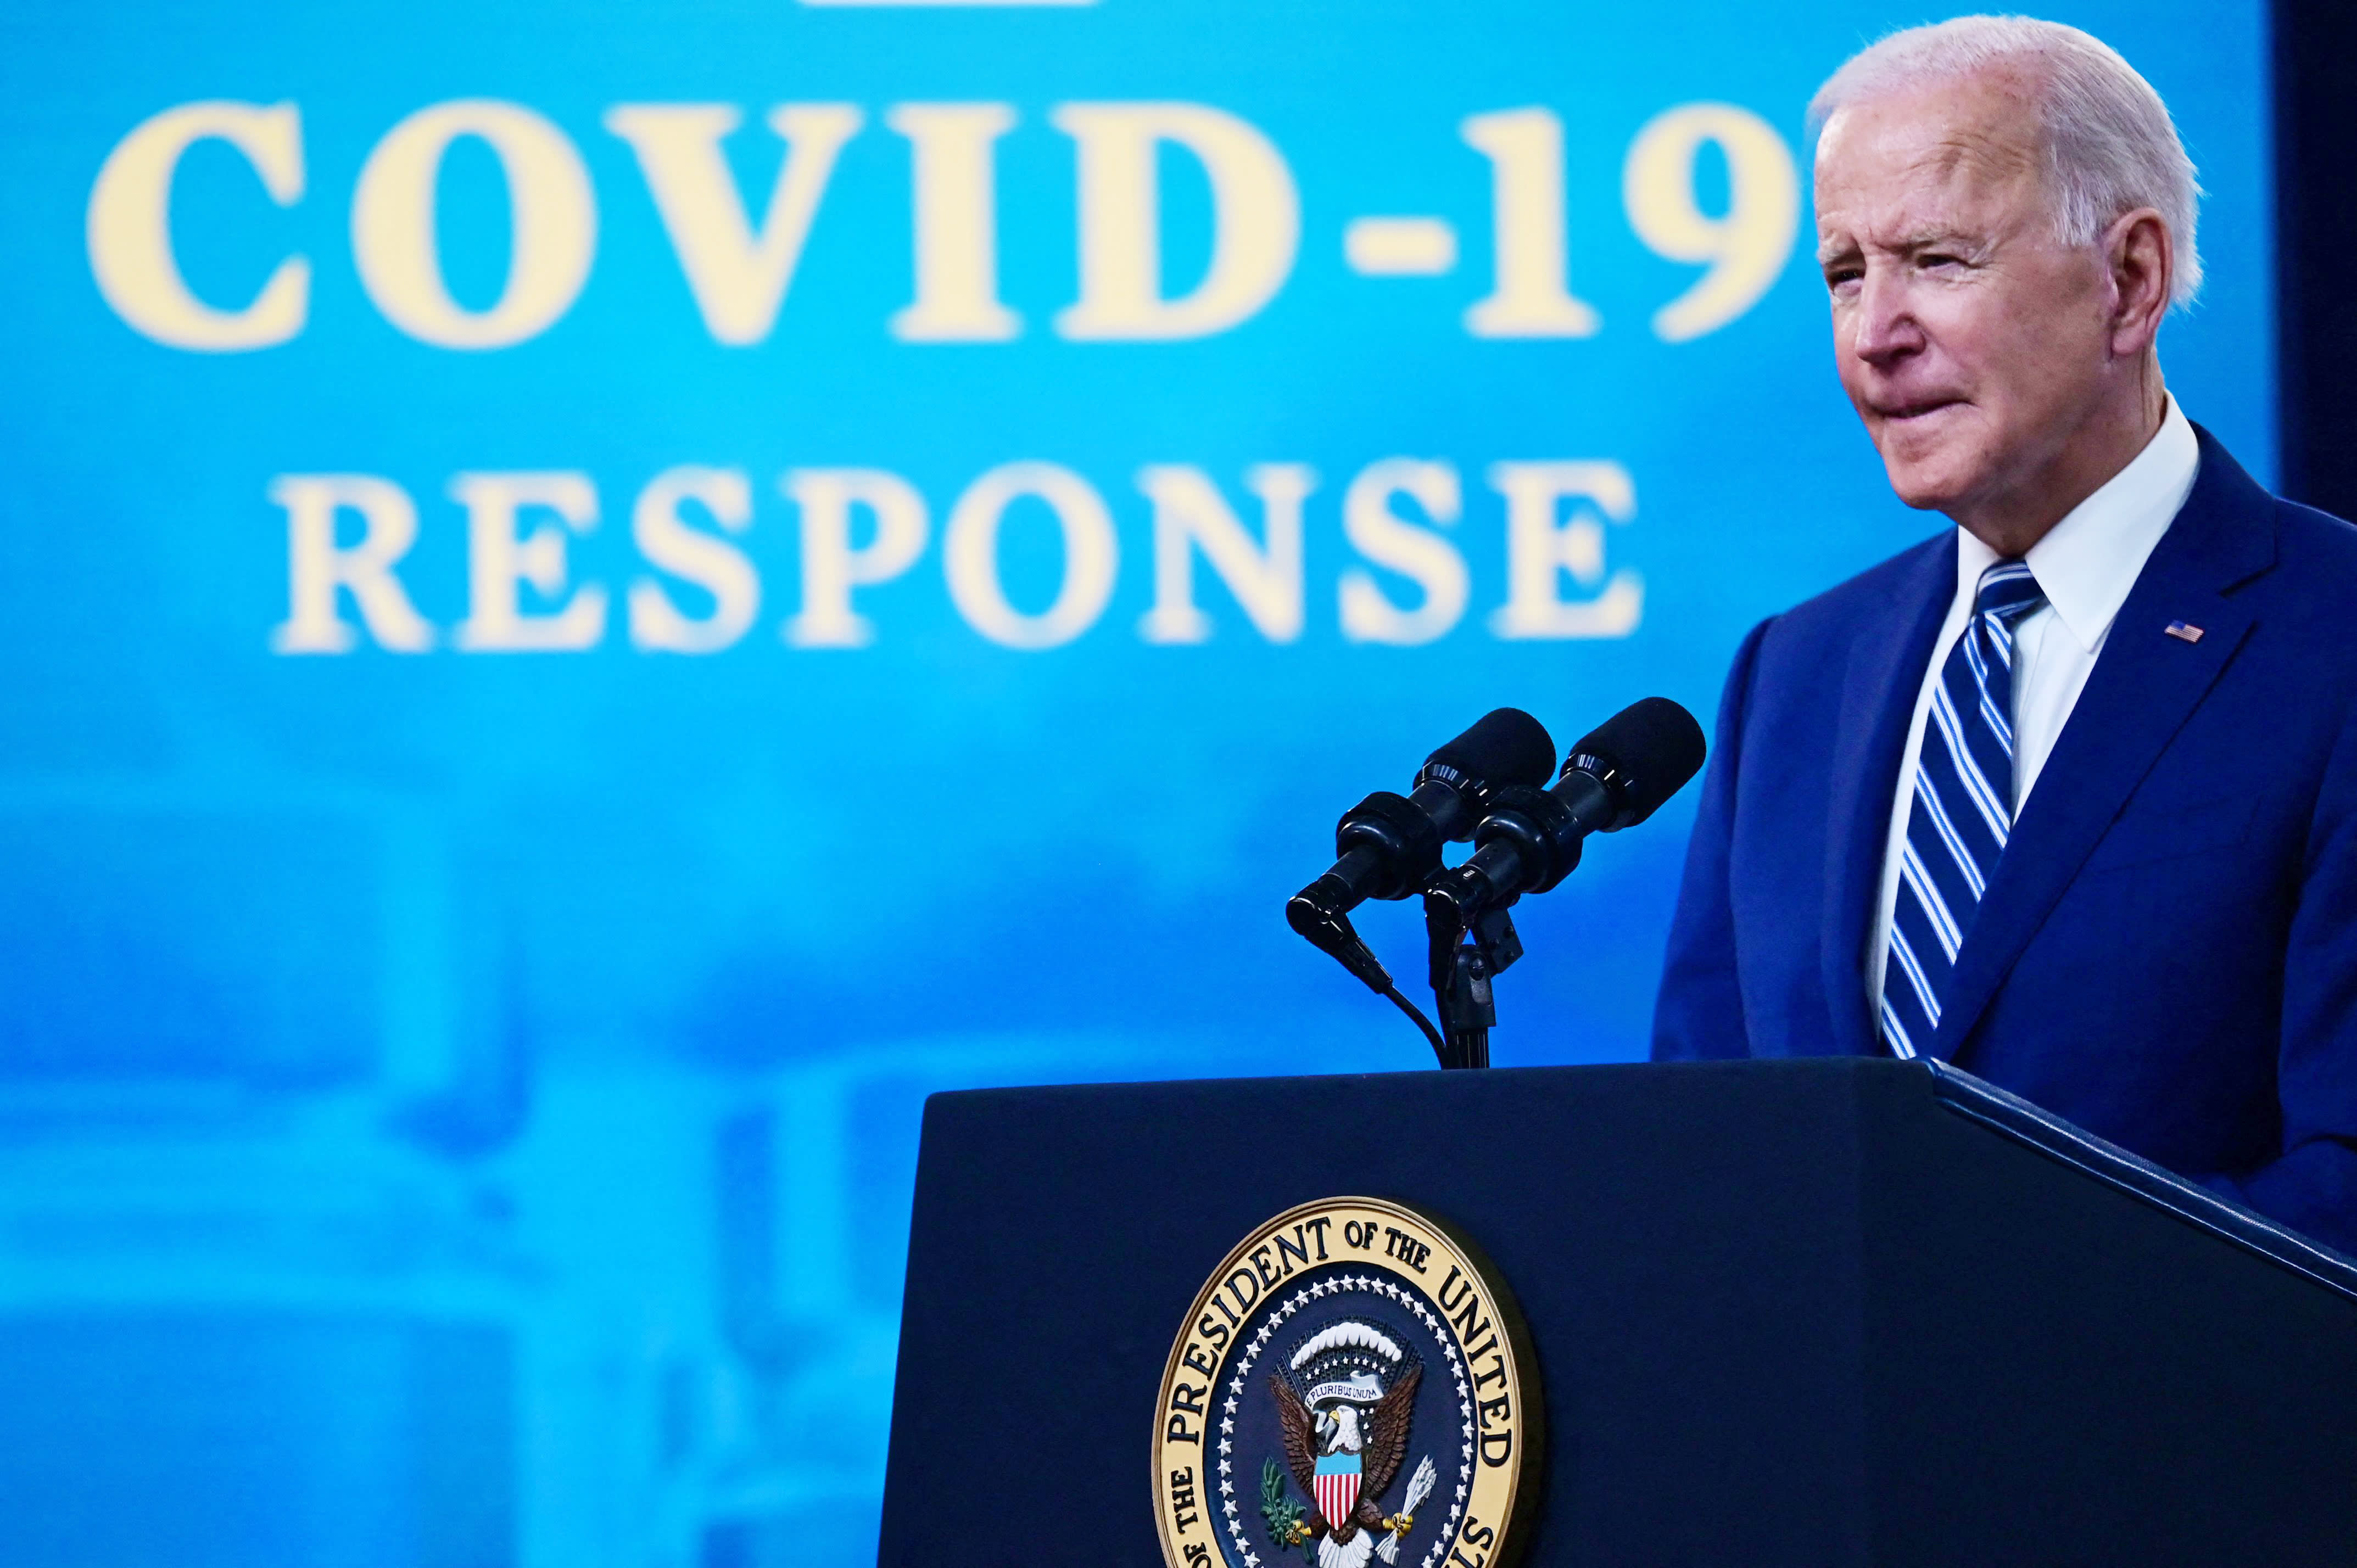 Biden says states should reinstate mask mandates and wait to reopen businesses as Covid cases rise